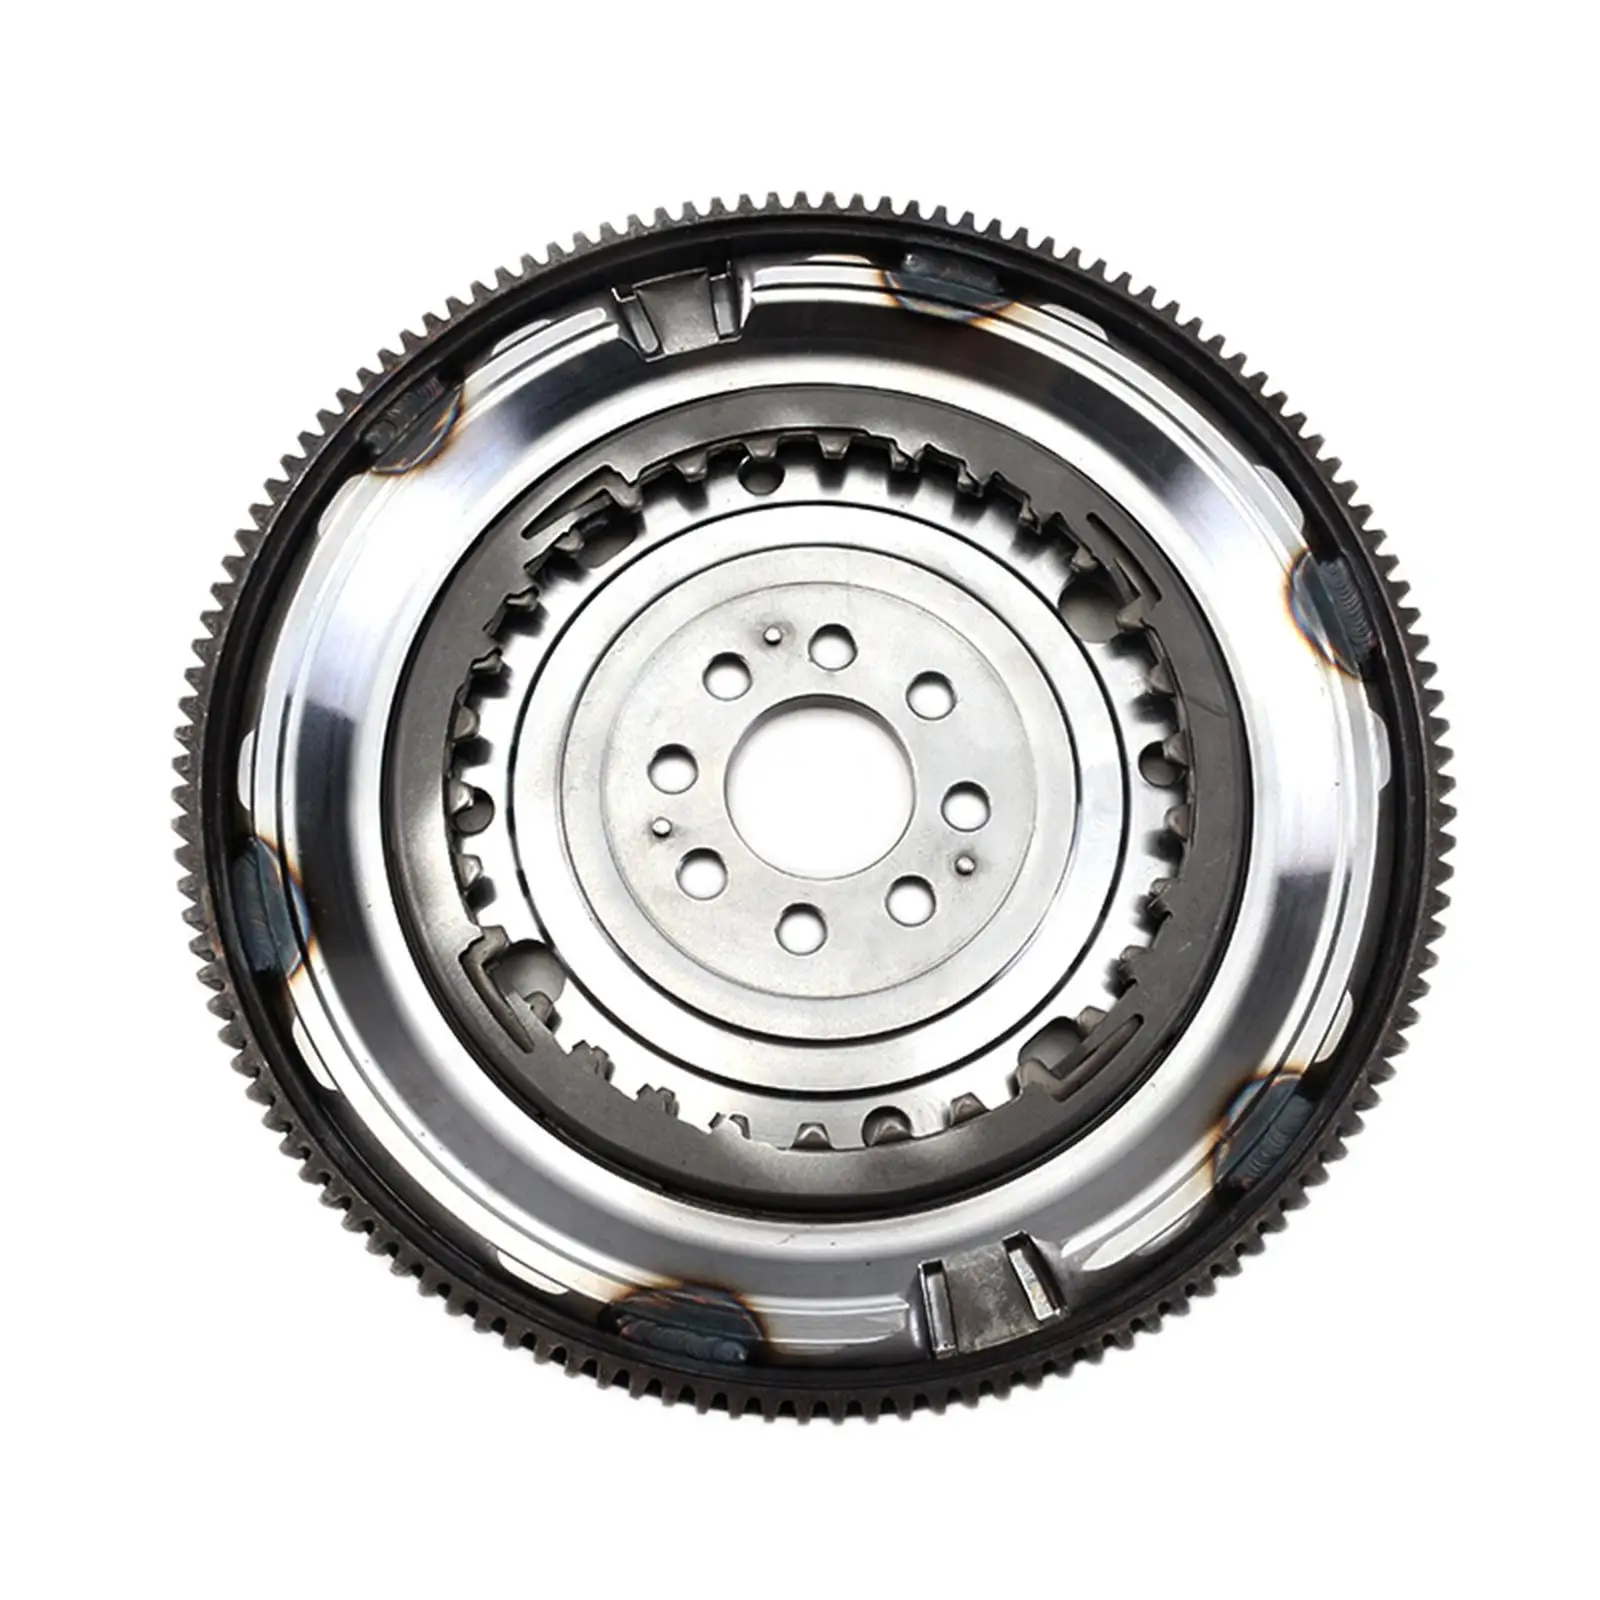 Automotive Gearbox Clutch Flywheel Easy Installation Automatic Transmission Flywheel for VW Engine Parts Accessory Replaces